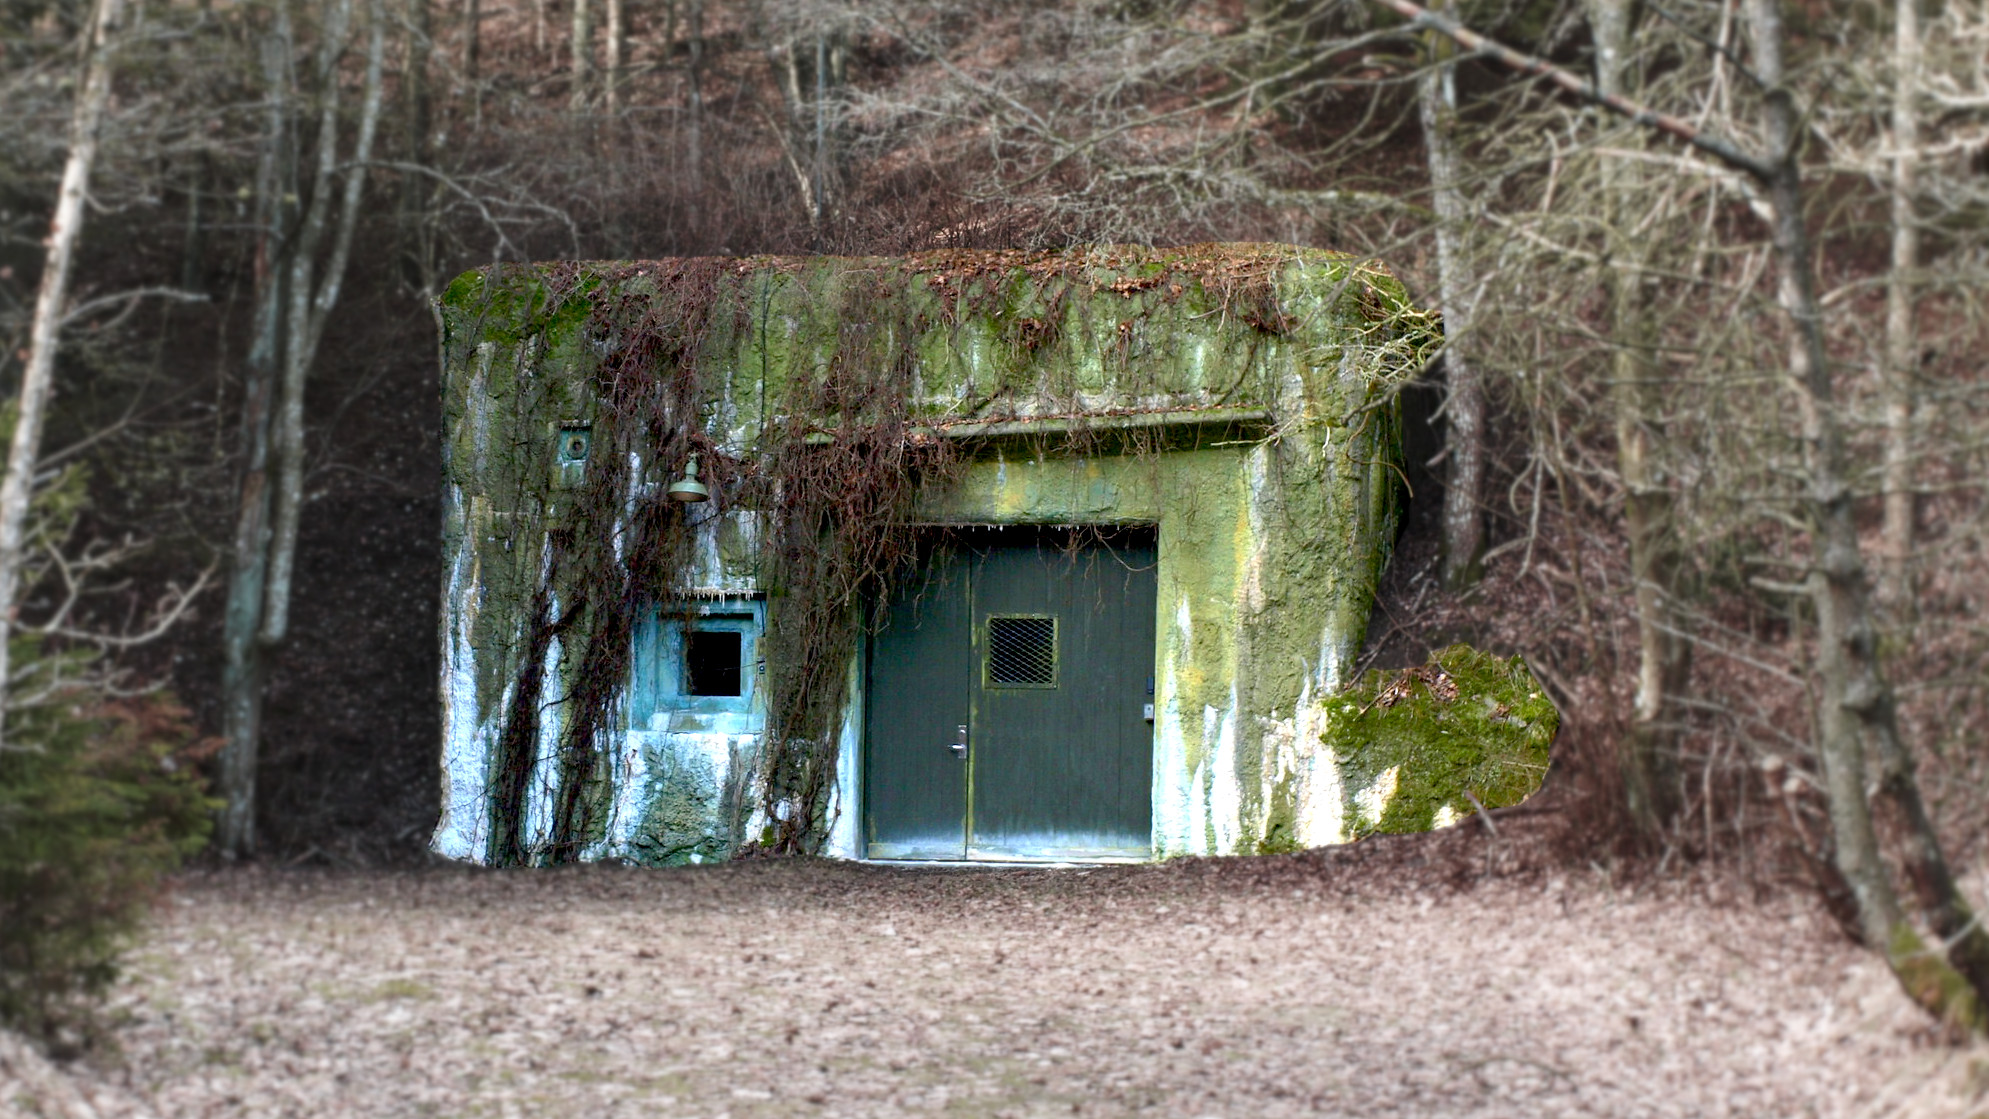 The entrance to a bunker in the woods